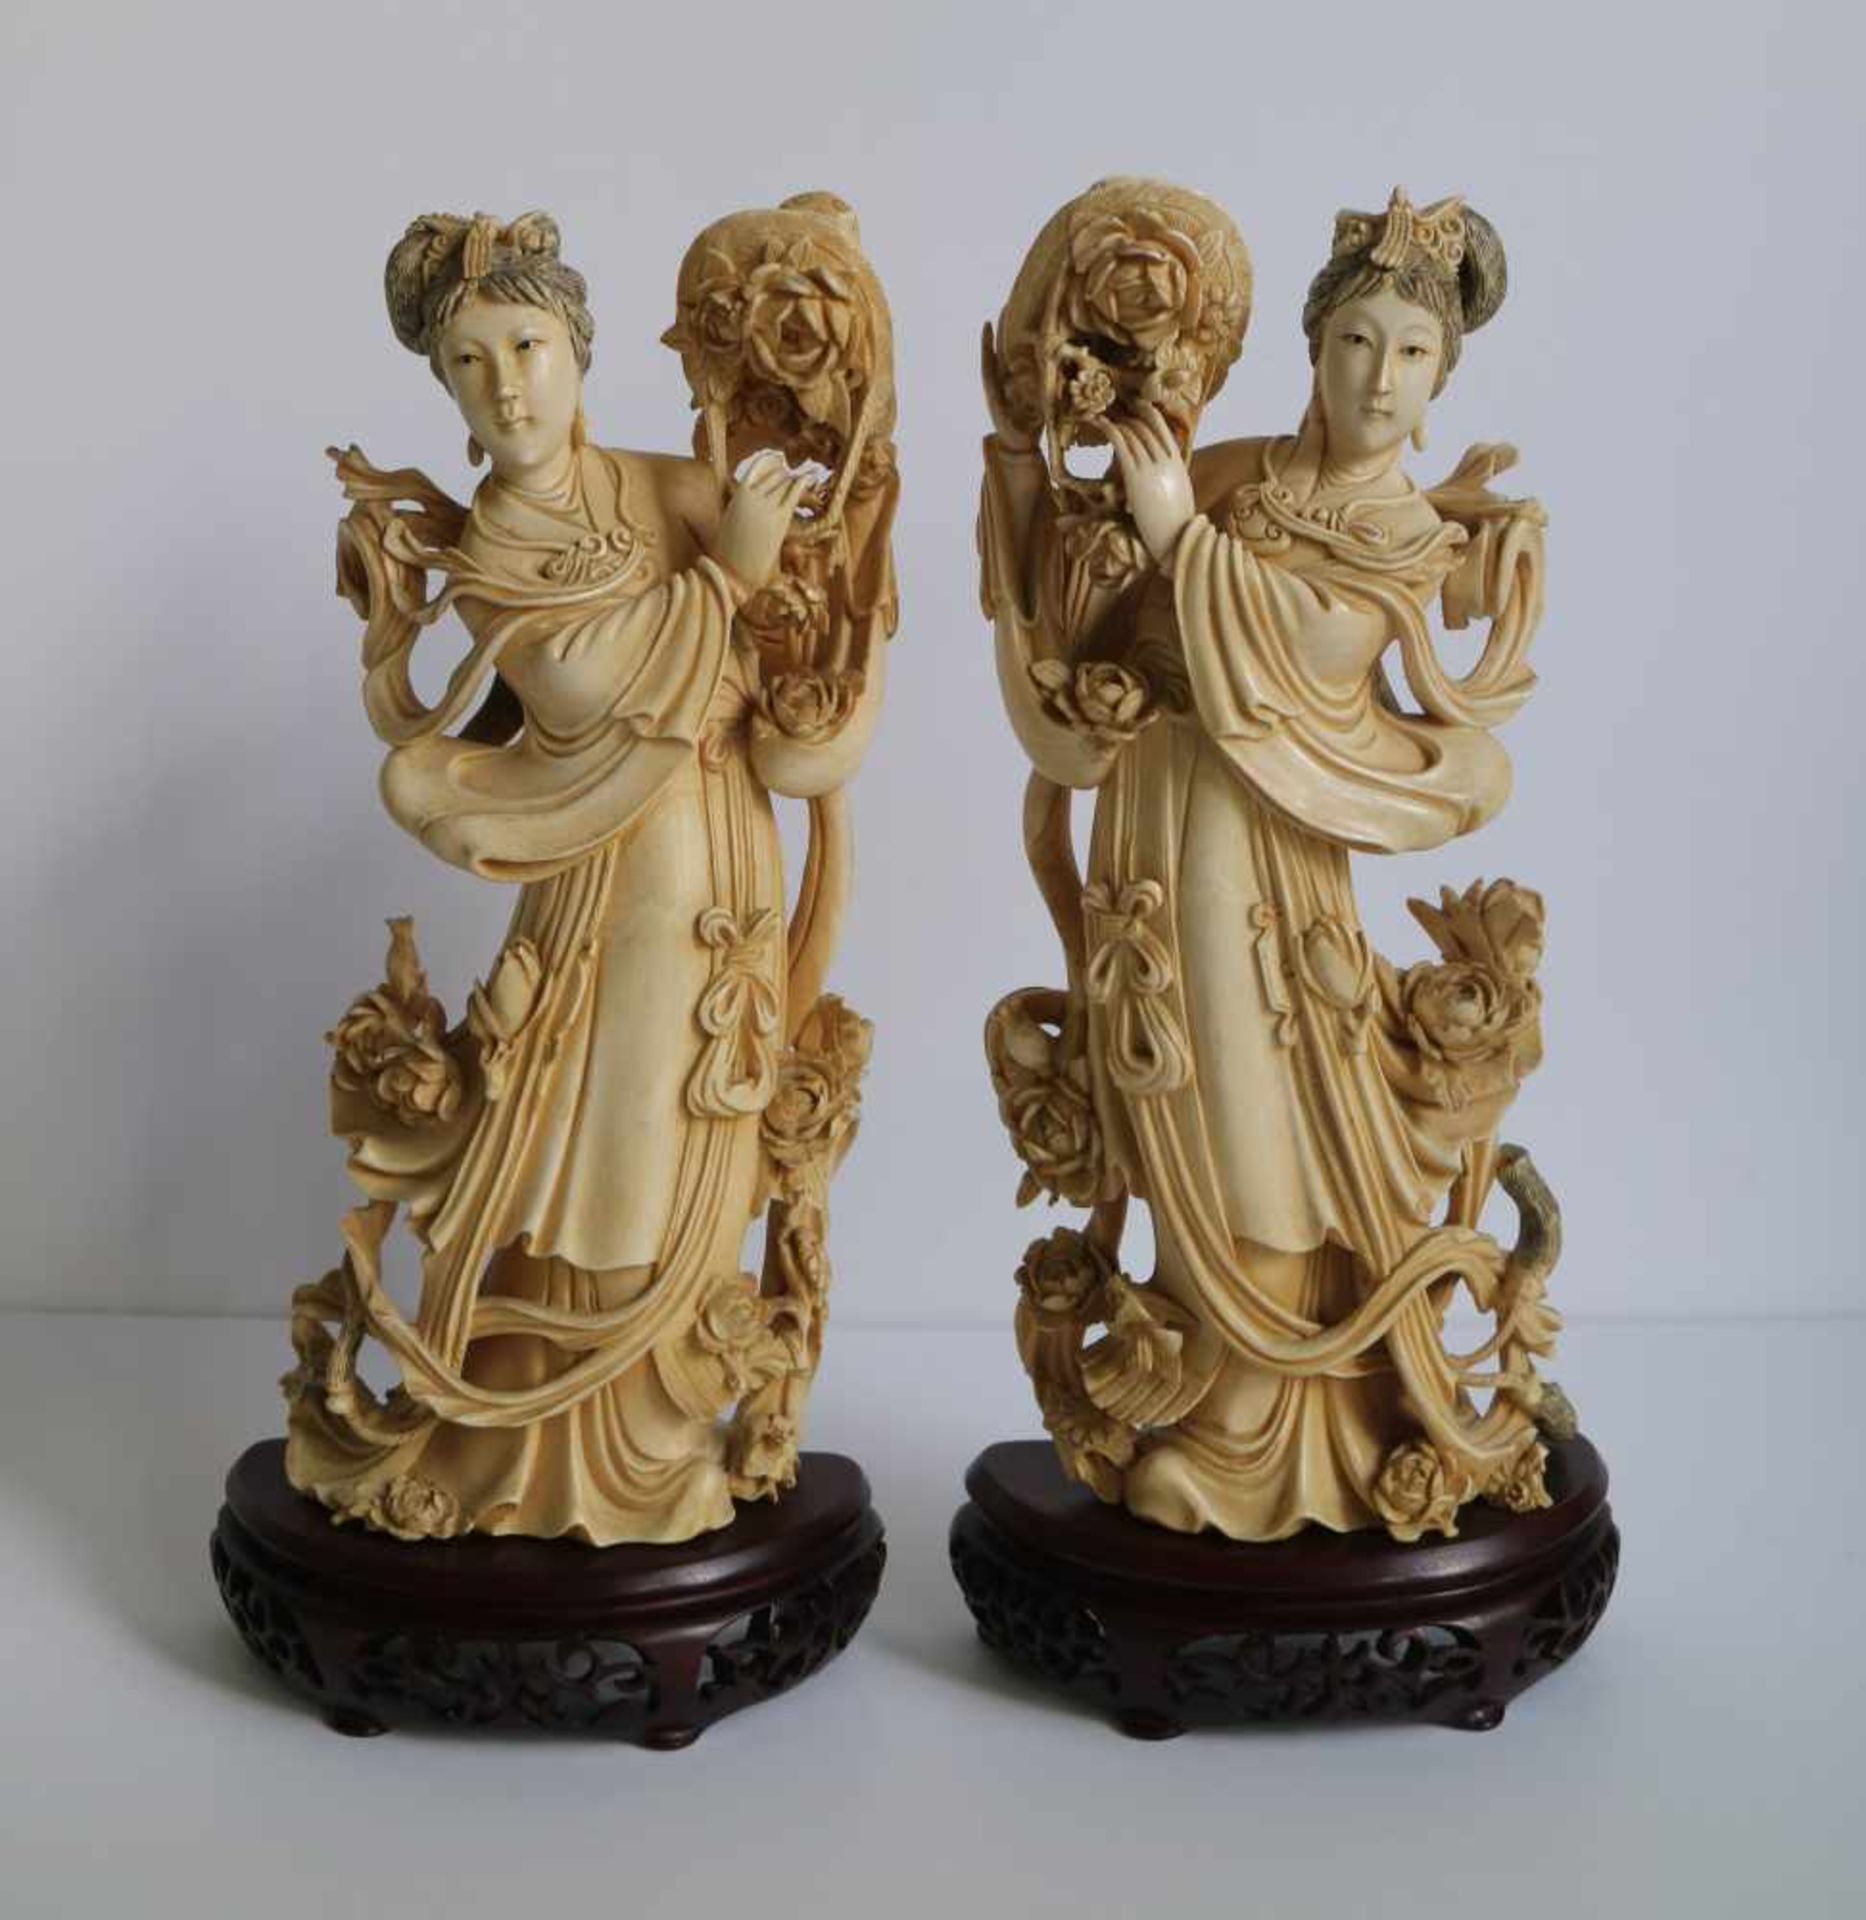 Ivory figures by He Xiangu with flowers symmetrically carved, China Republic period H 28,5 cm + 4,5